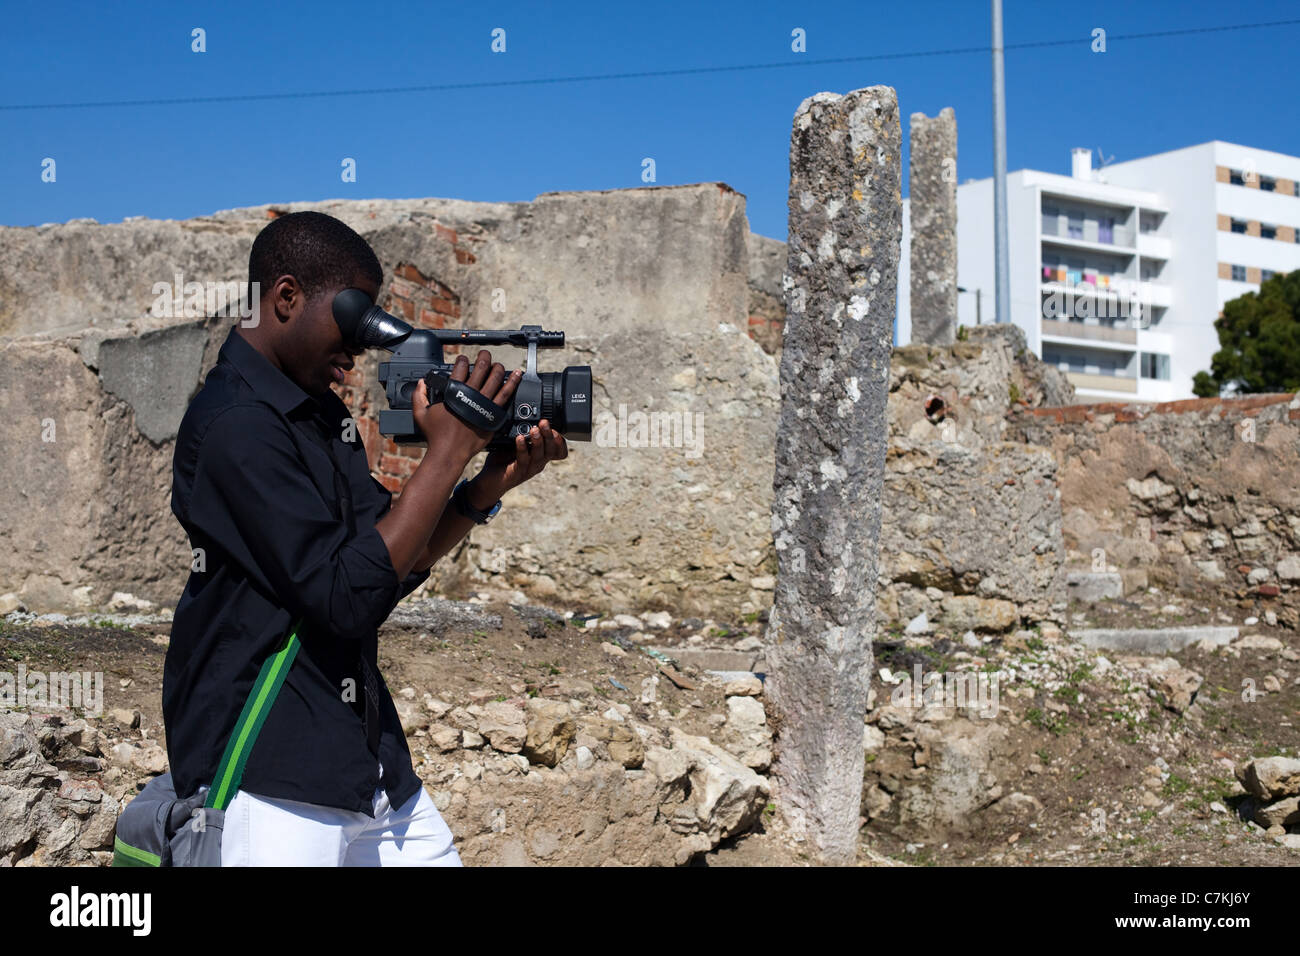 African man filming. Stock Photo